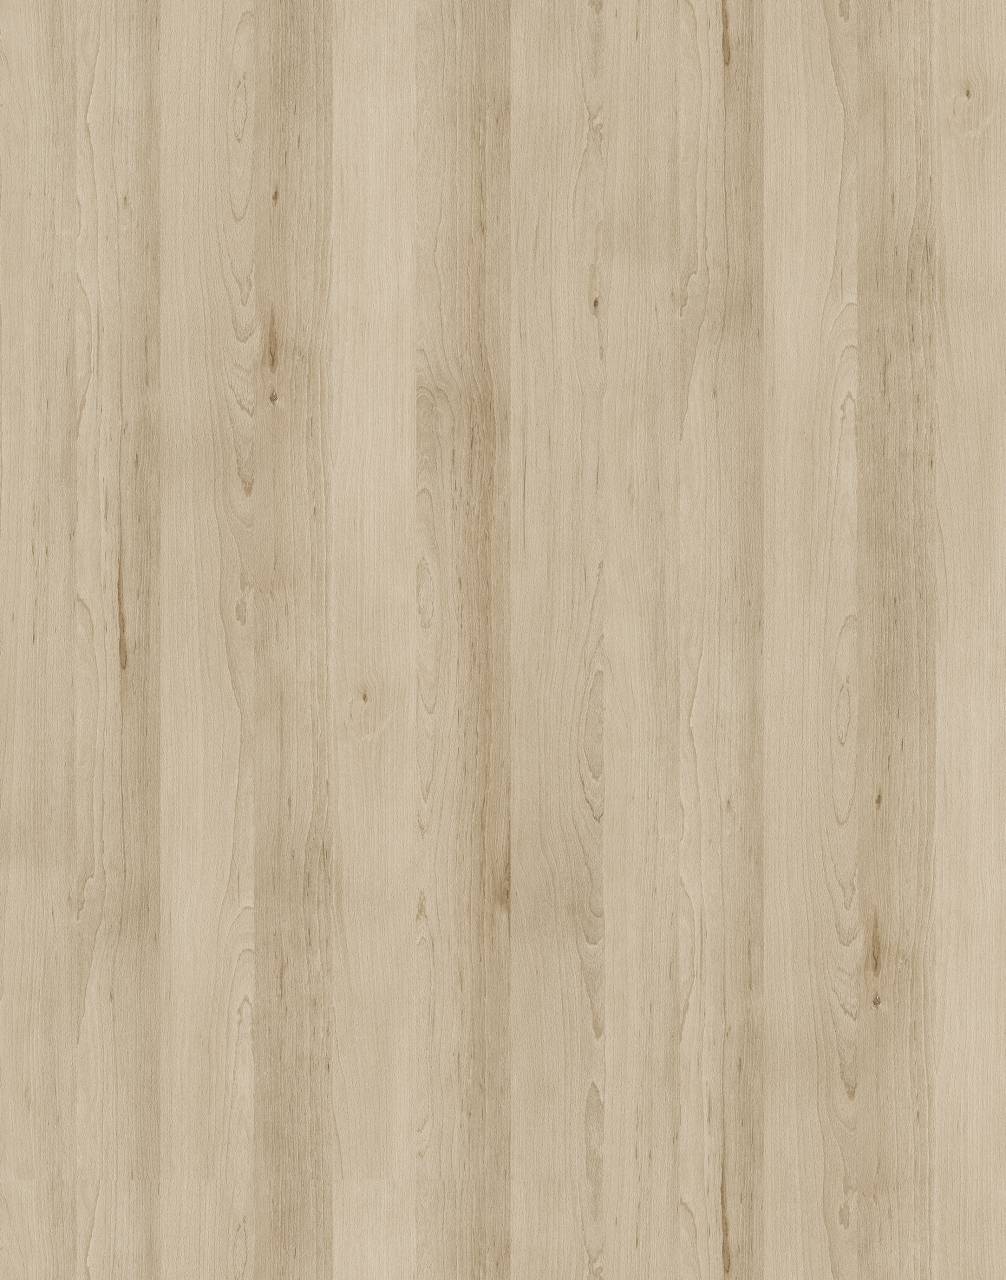 Sand Artisan Beech SU HPL with smooth surface and light brown tones for a natural and versatile look.